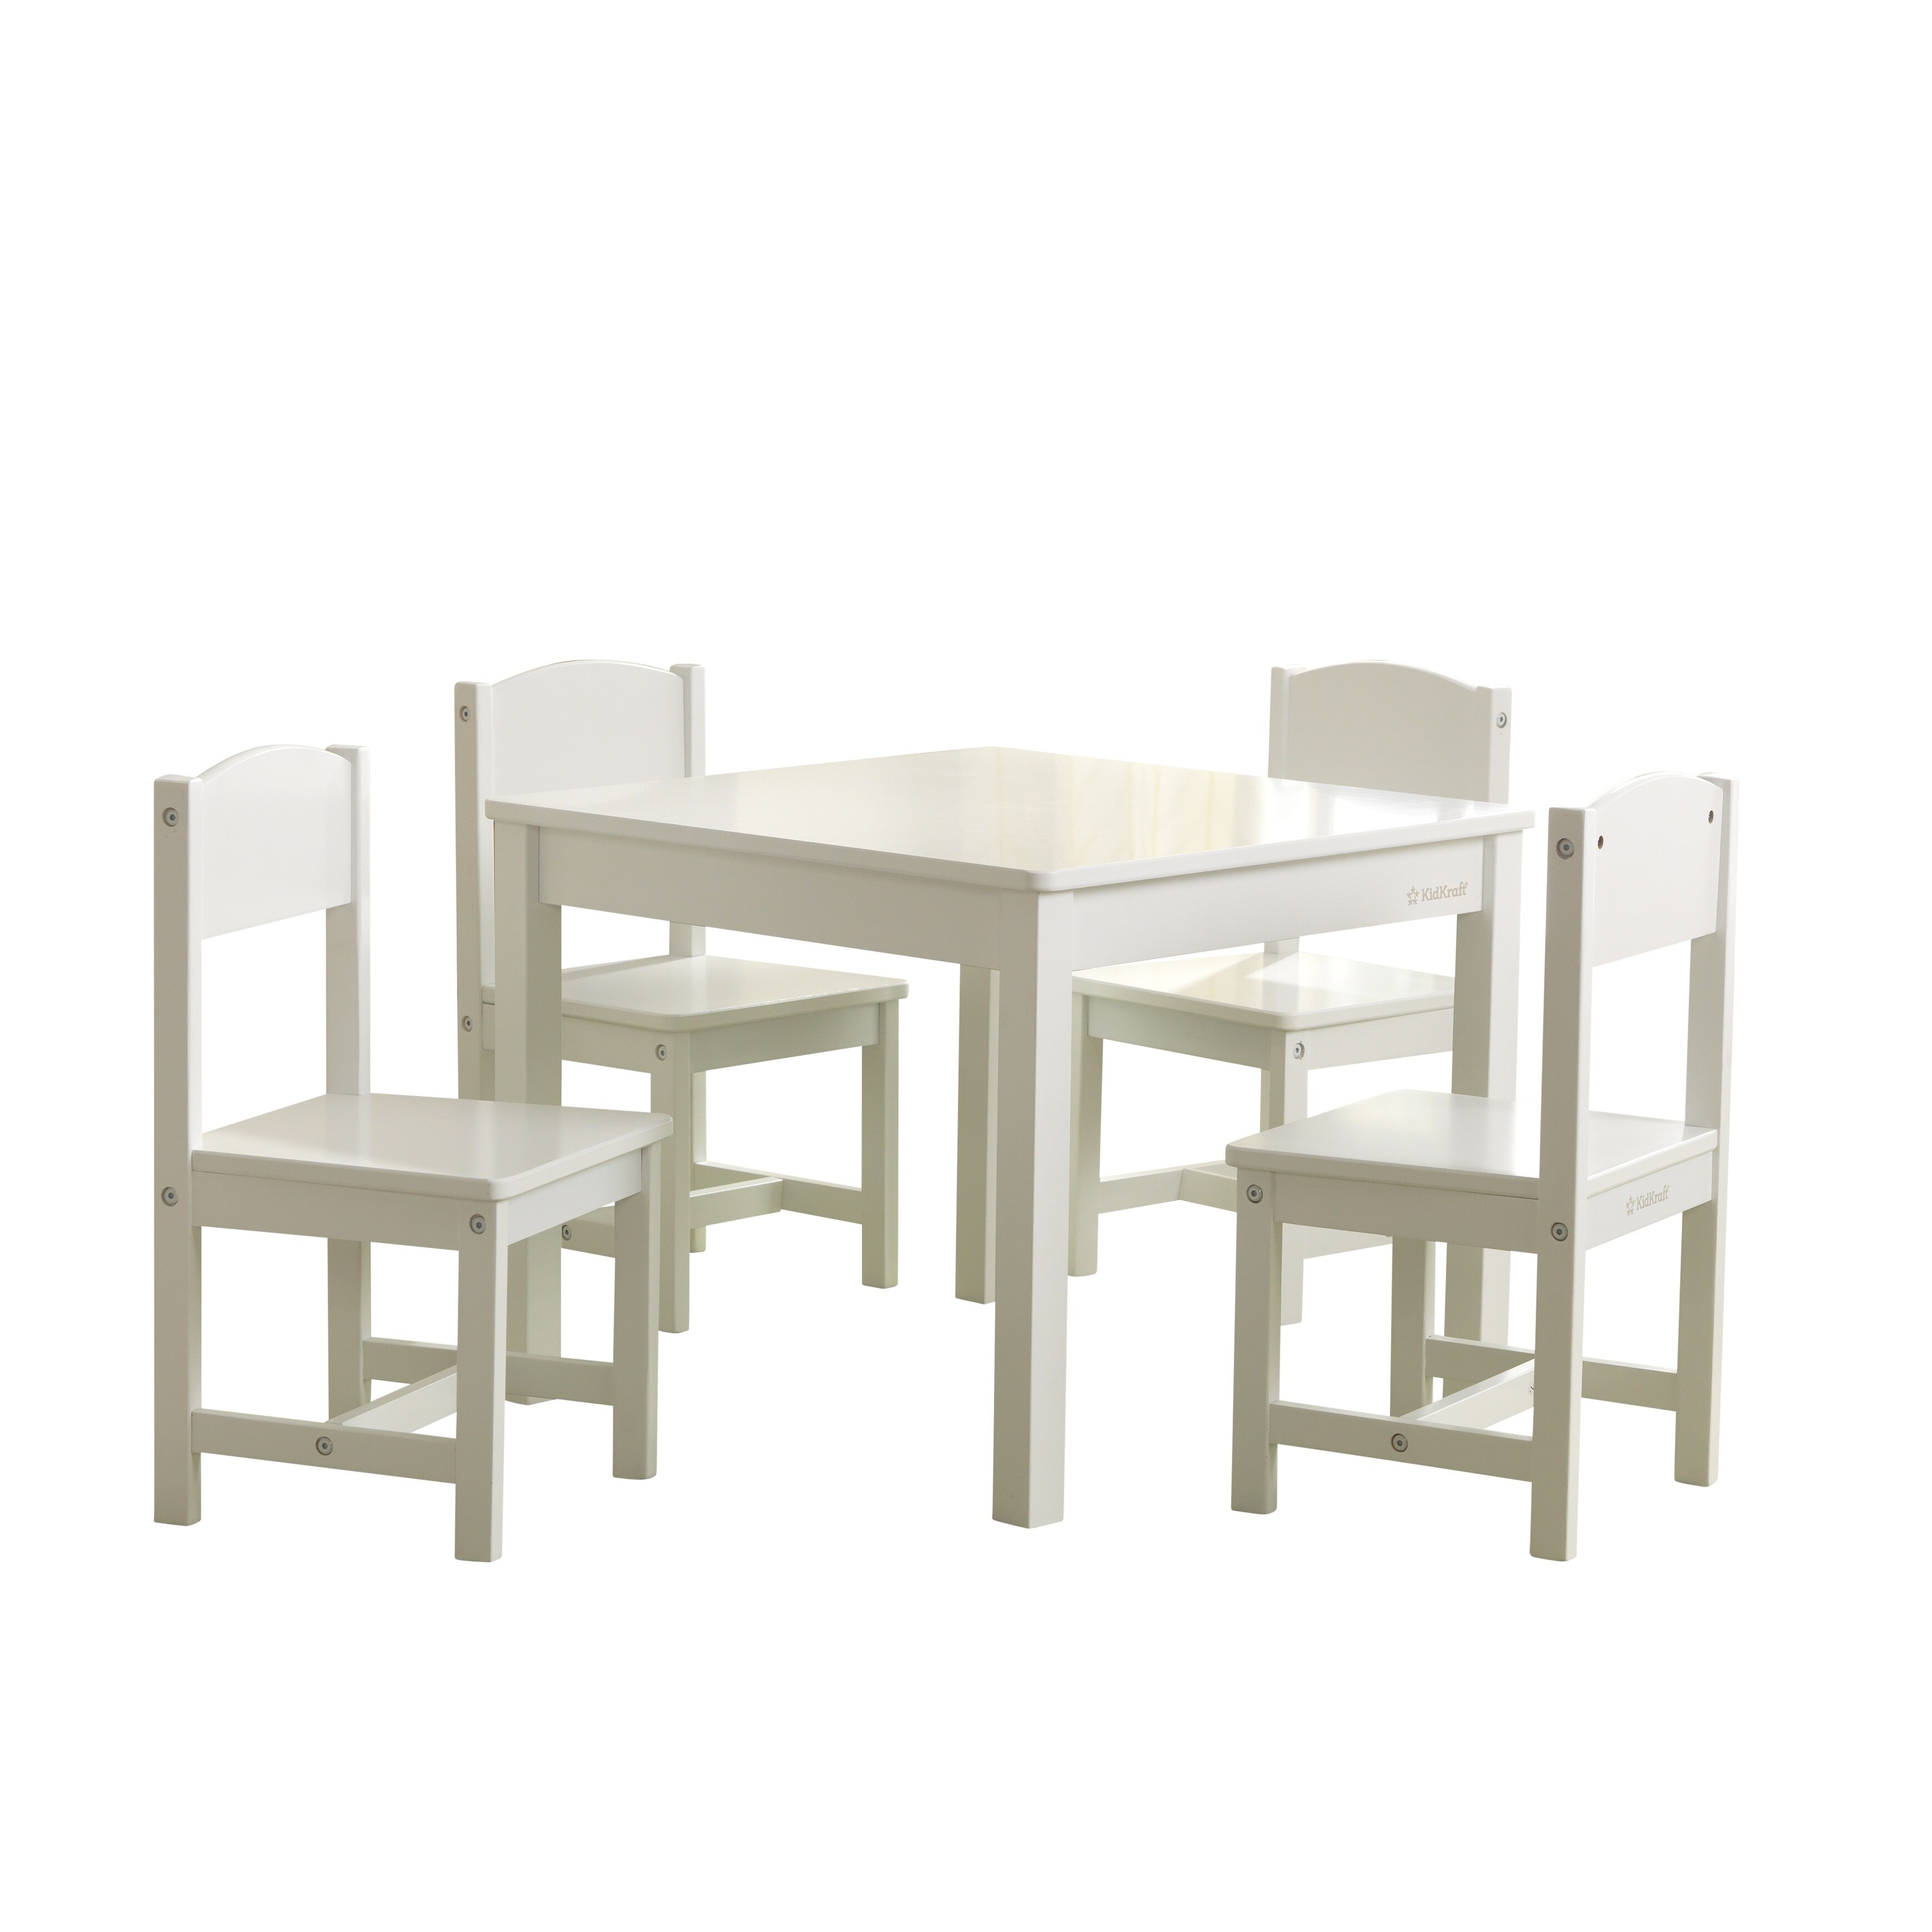 kids farmhouse table and chairs